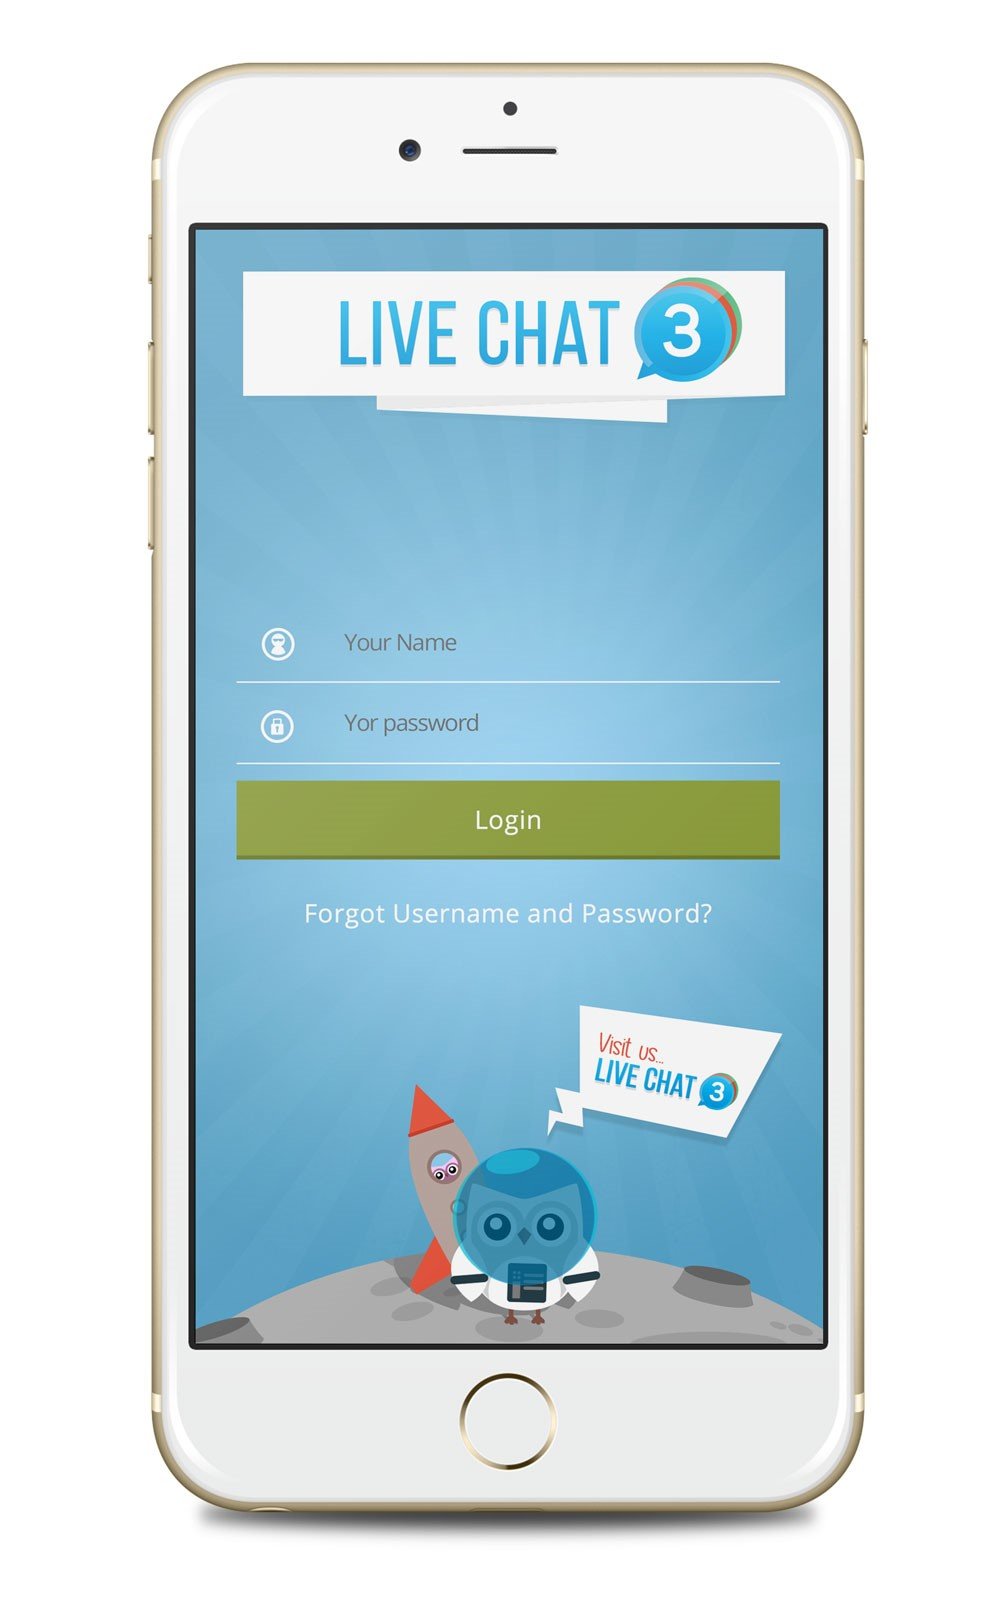 Live chat 3 network